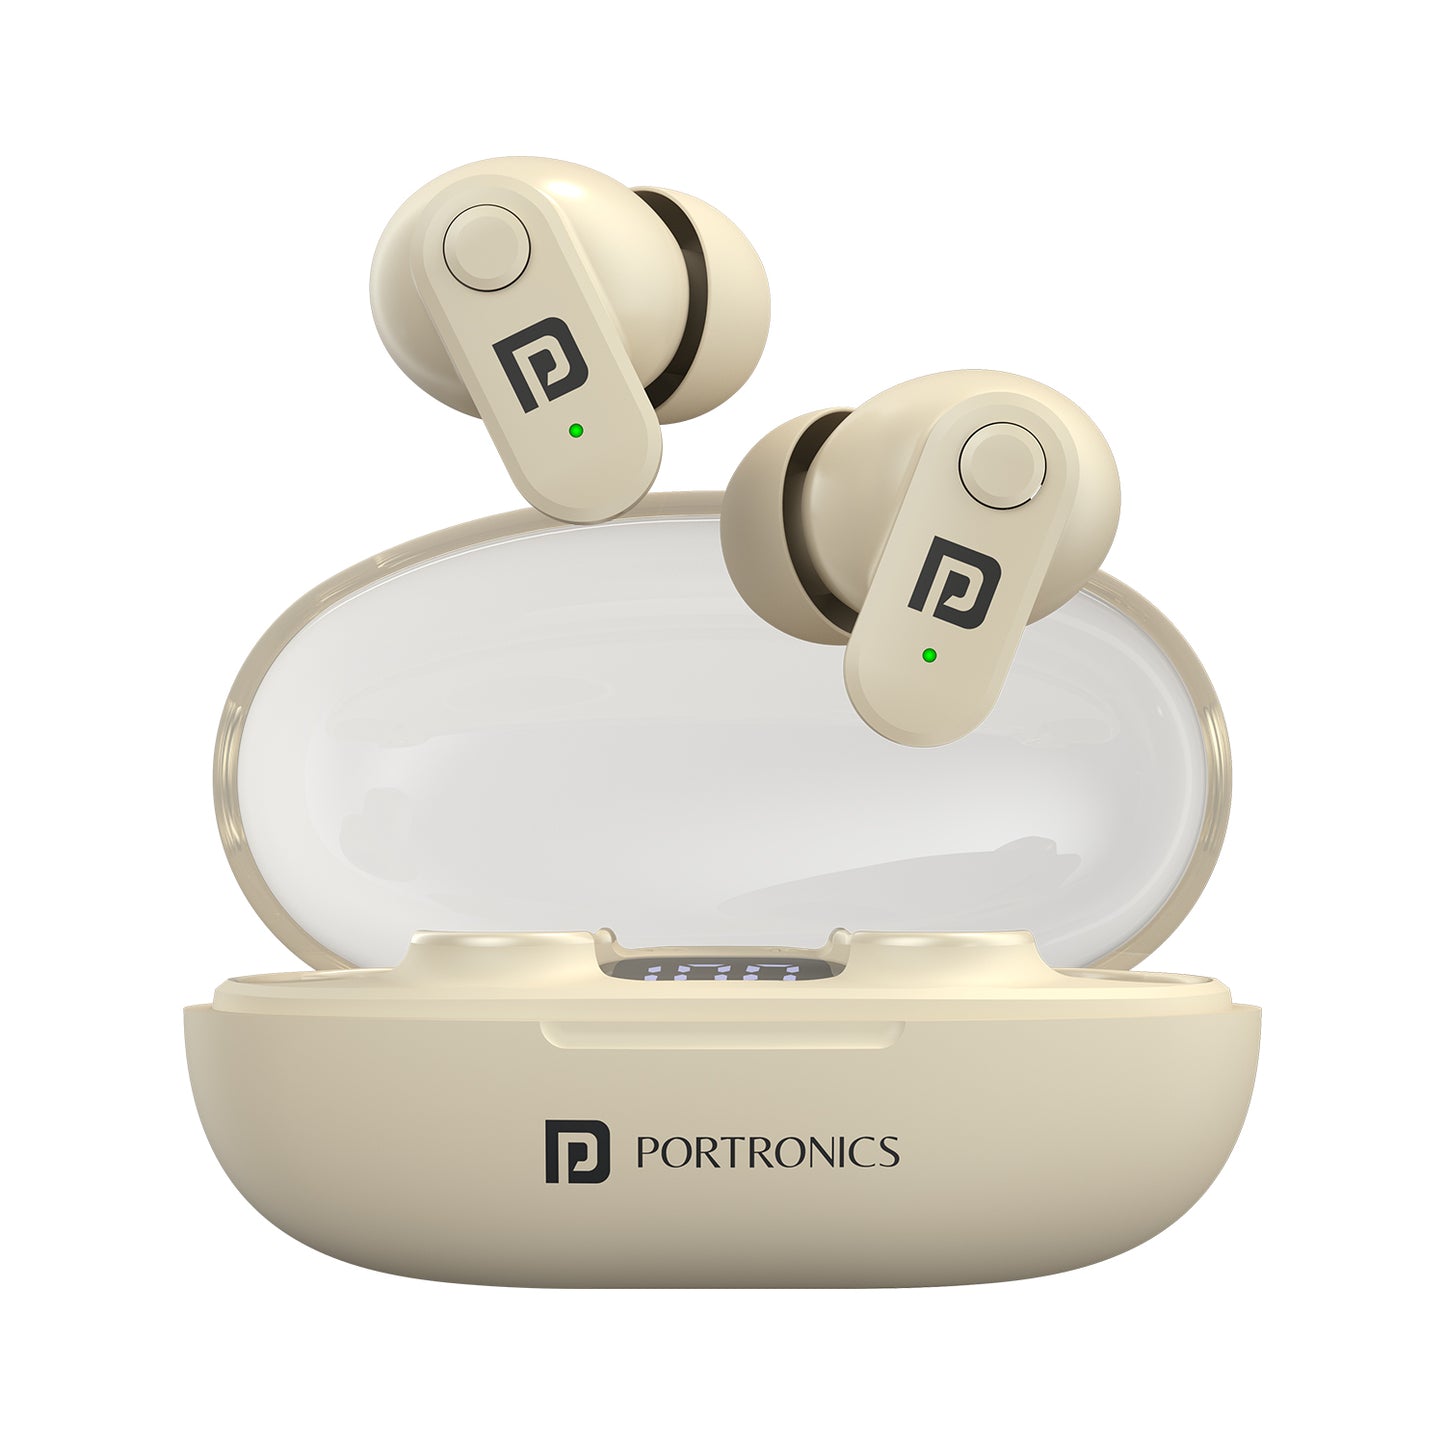 Portronics Harmonics Twins s16 Smart wireless TWS earbuds| earbuds with noise cancelling online| best anc earbuds for calling